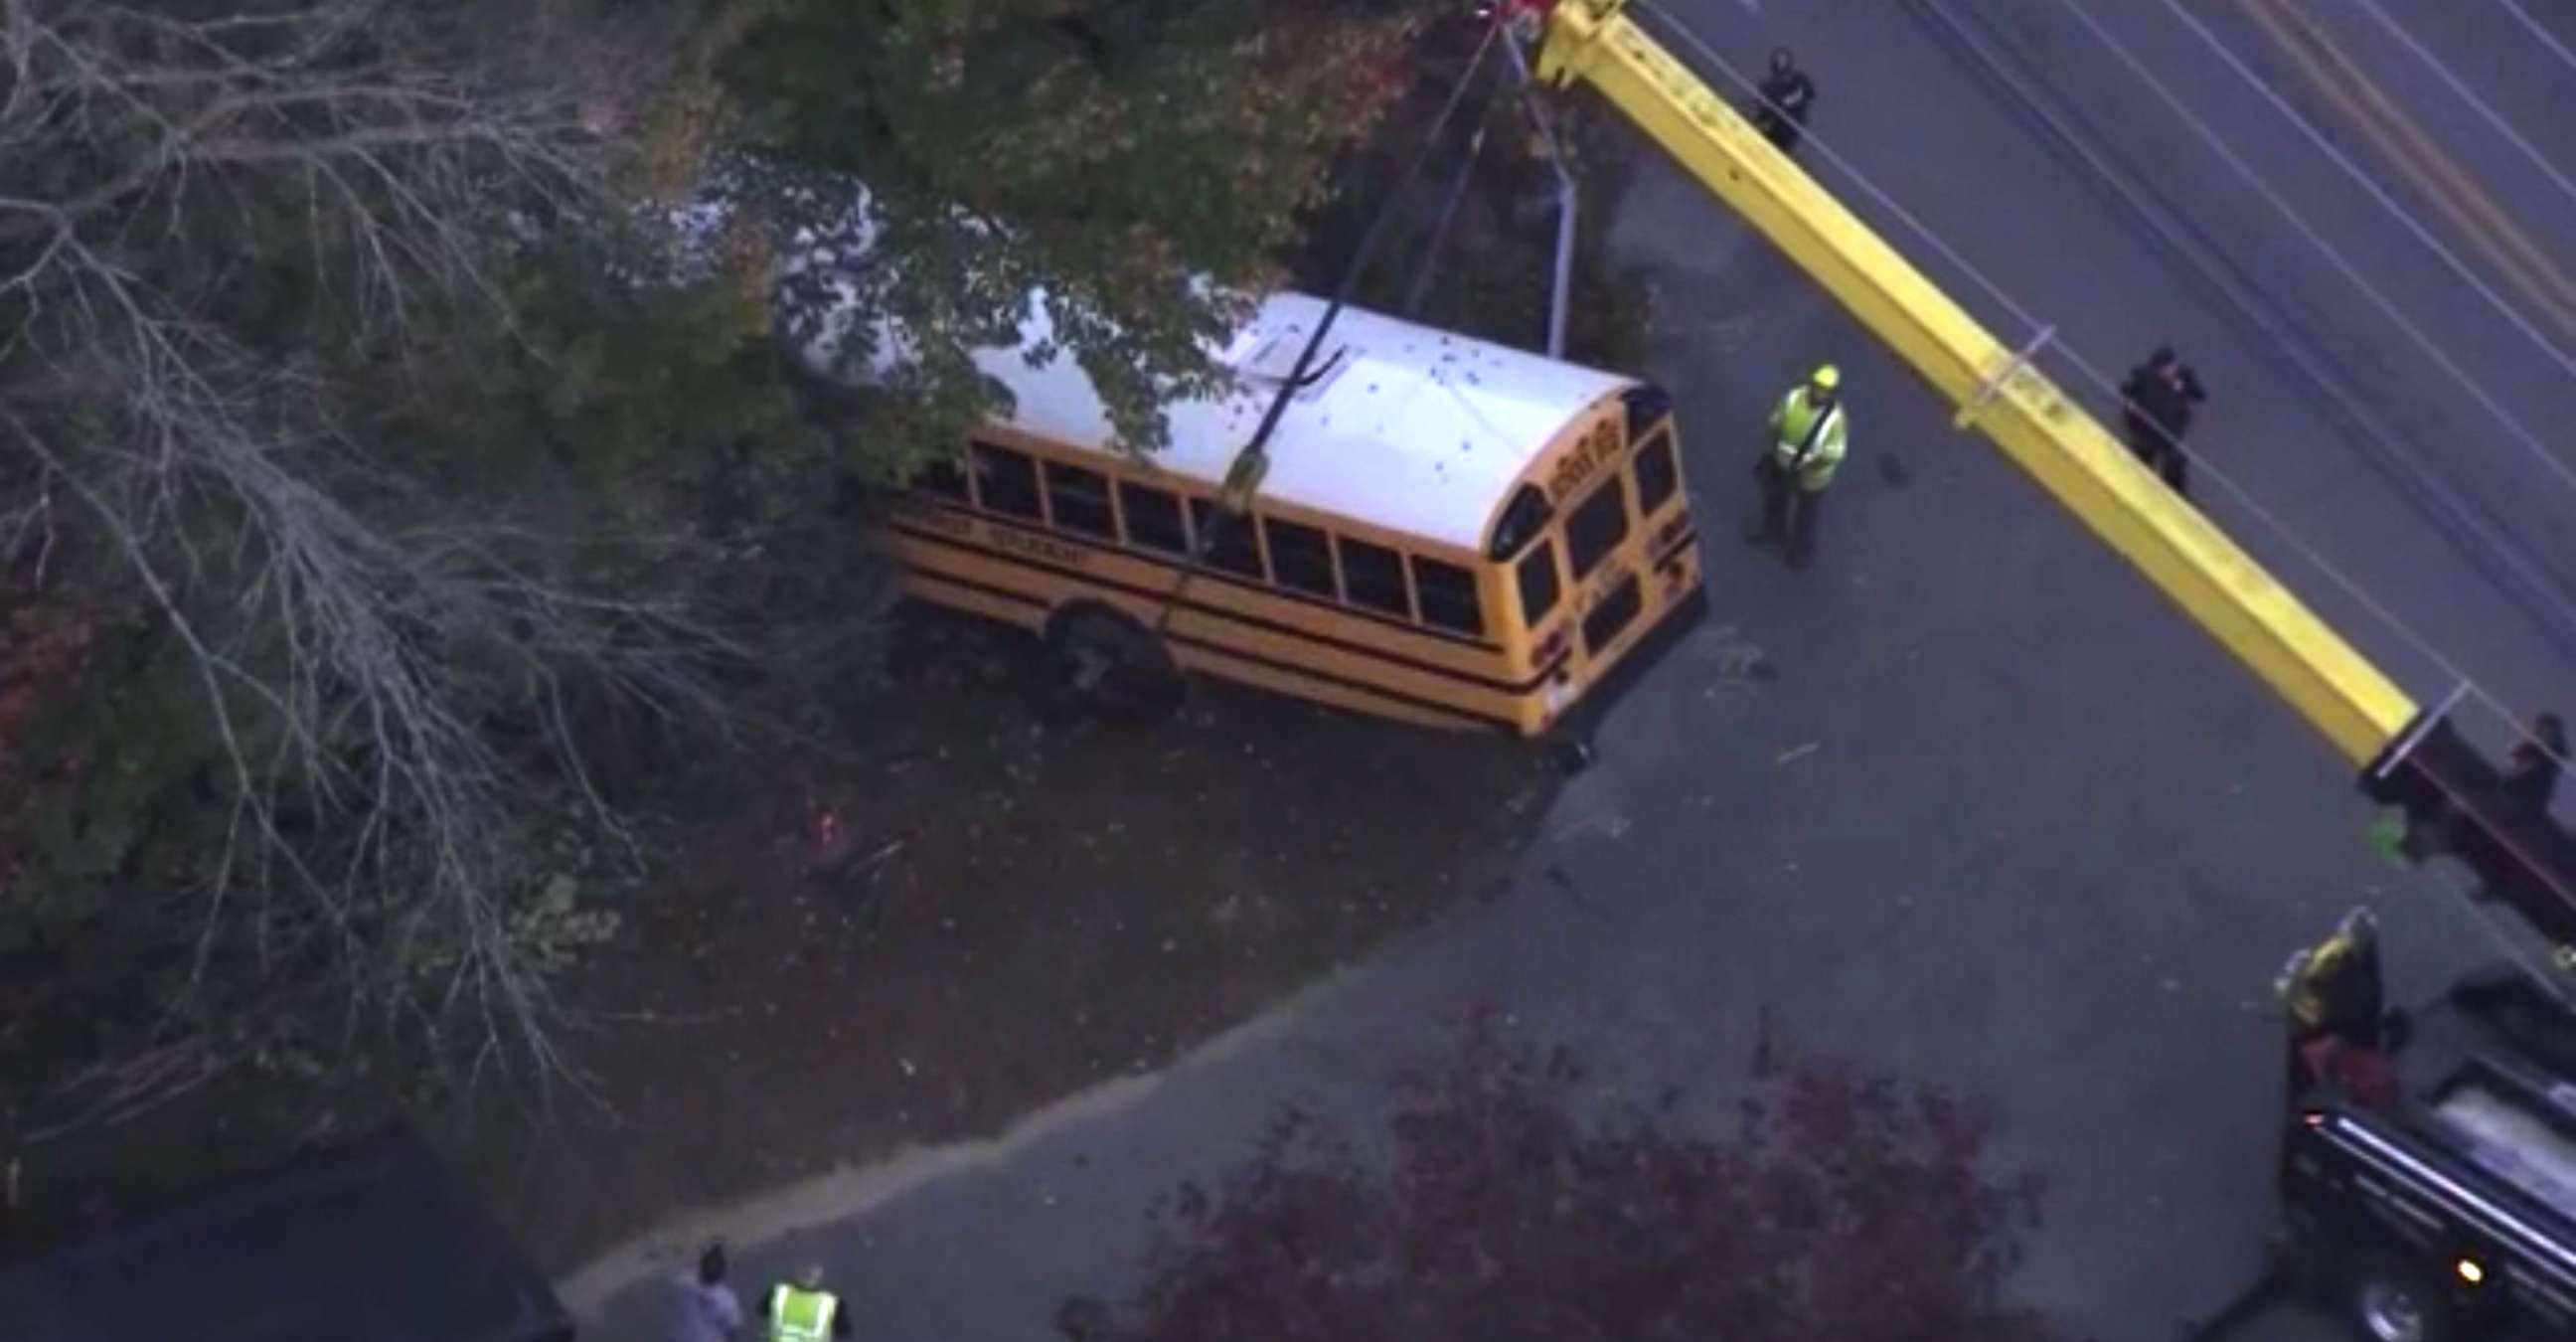 PHOTO: Two moms rescue children after their school bus crashed into the woods in Plaistow, N.H., Oct. 12, 2021.